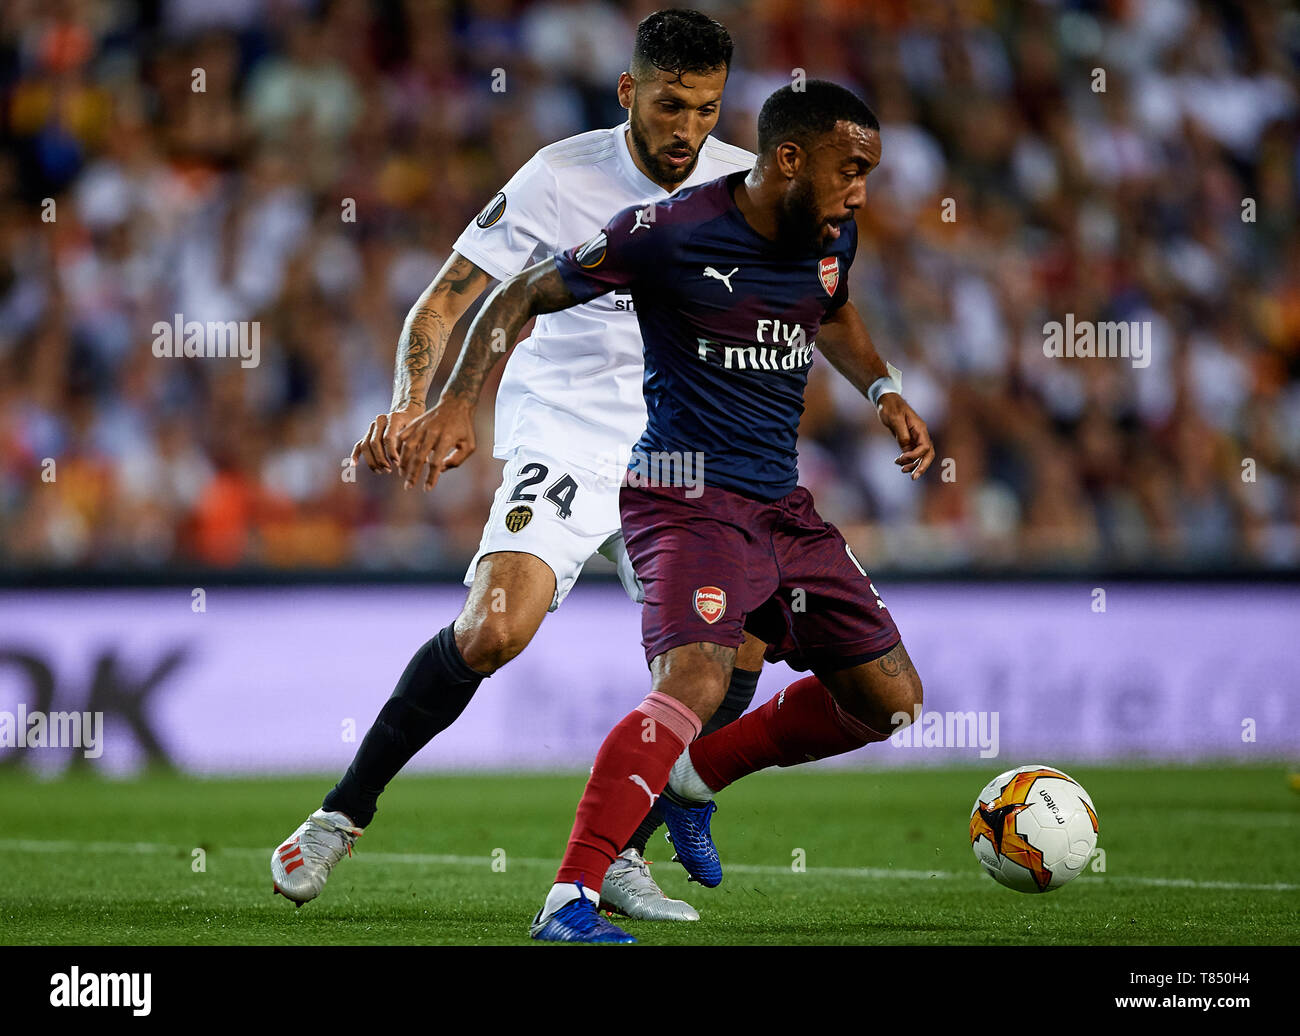 VALENCIA, SPAIN - MAY 09: Alexandre Lacazette (R) of Arsenal competes for the ball with Ezequiel Garay of Valencia CF during the UEFA Europa League Semi Final Second Leg match between Valencia and Arsenal at Estadio Mestalla on May 9, 2019 in Valencia, Spain. (Photo by David Aliaga/MB Media) Stock Photo